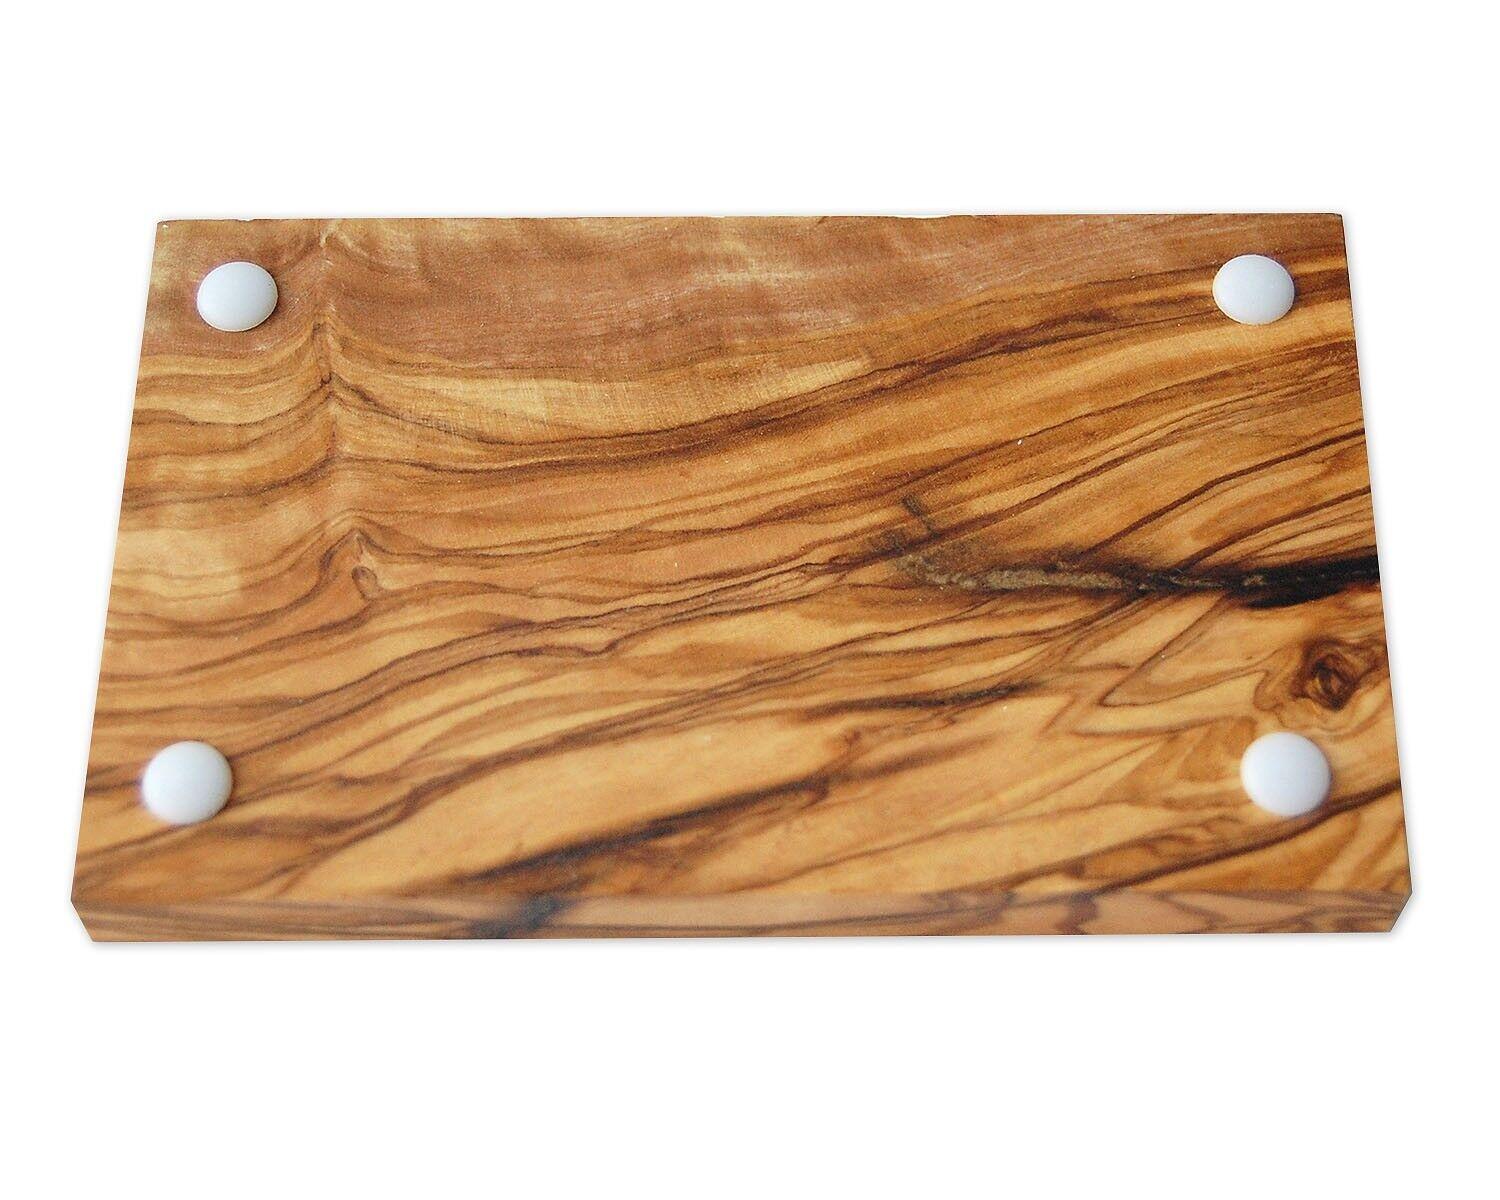 Olive Wood Soap Dish - Grooved with Pads